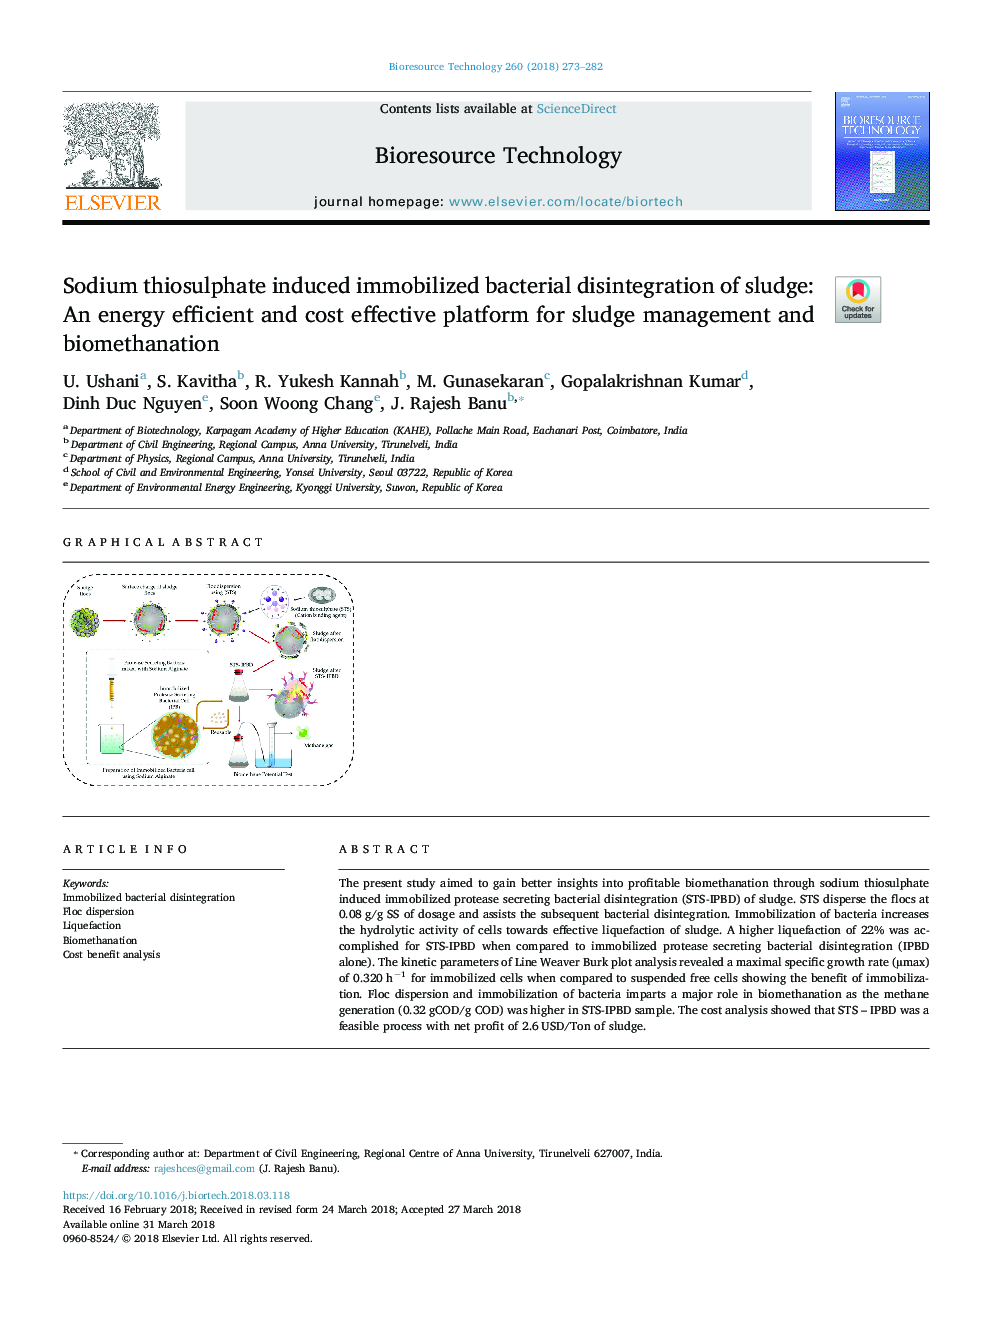 Sodium thiosulphate induced immobilized bacterial disintegration of sludge: An energy efficient and cost effective platform for sludge management and biomethanation